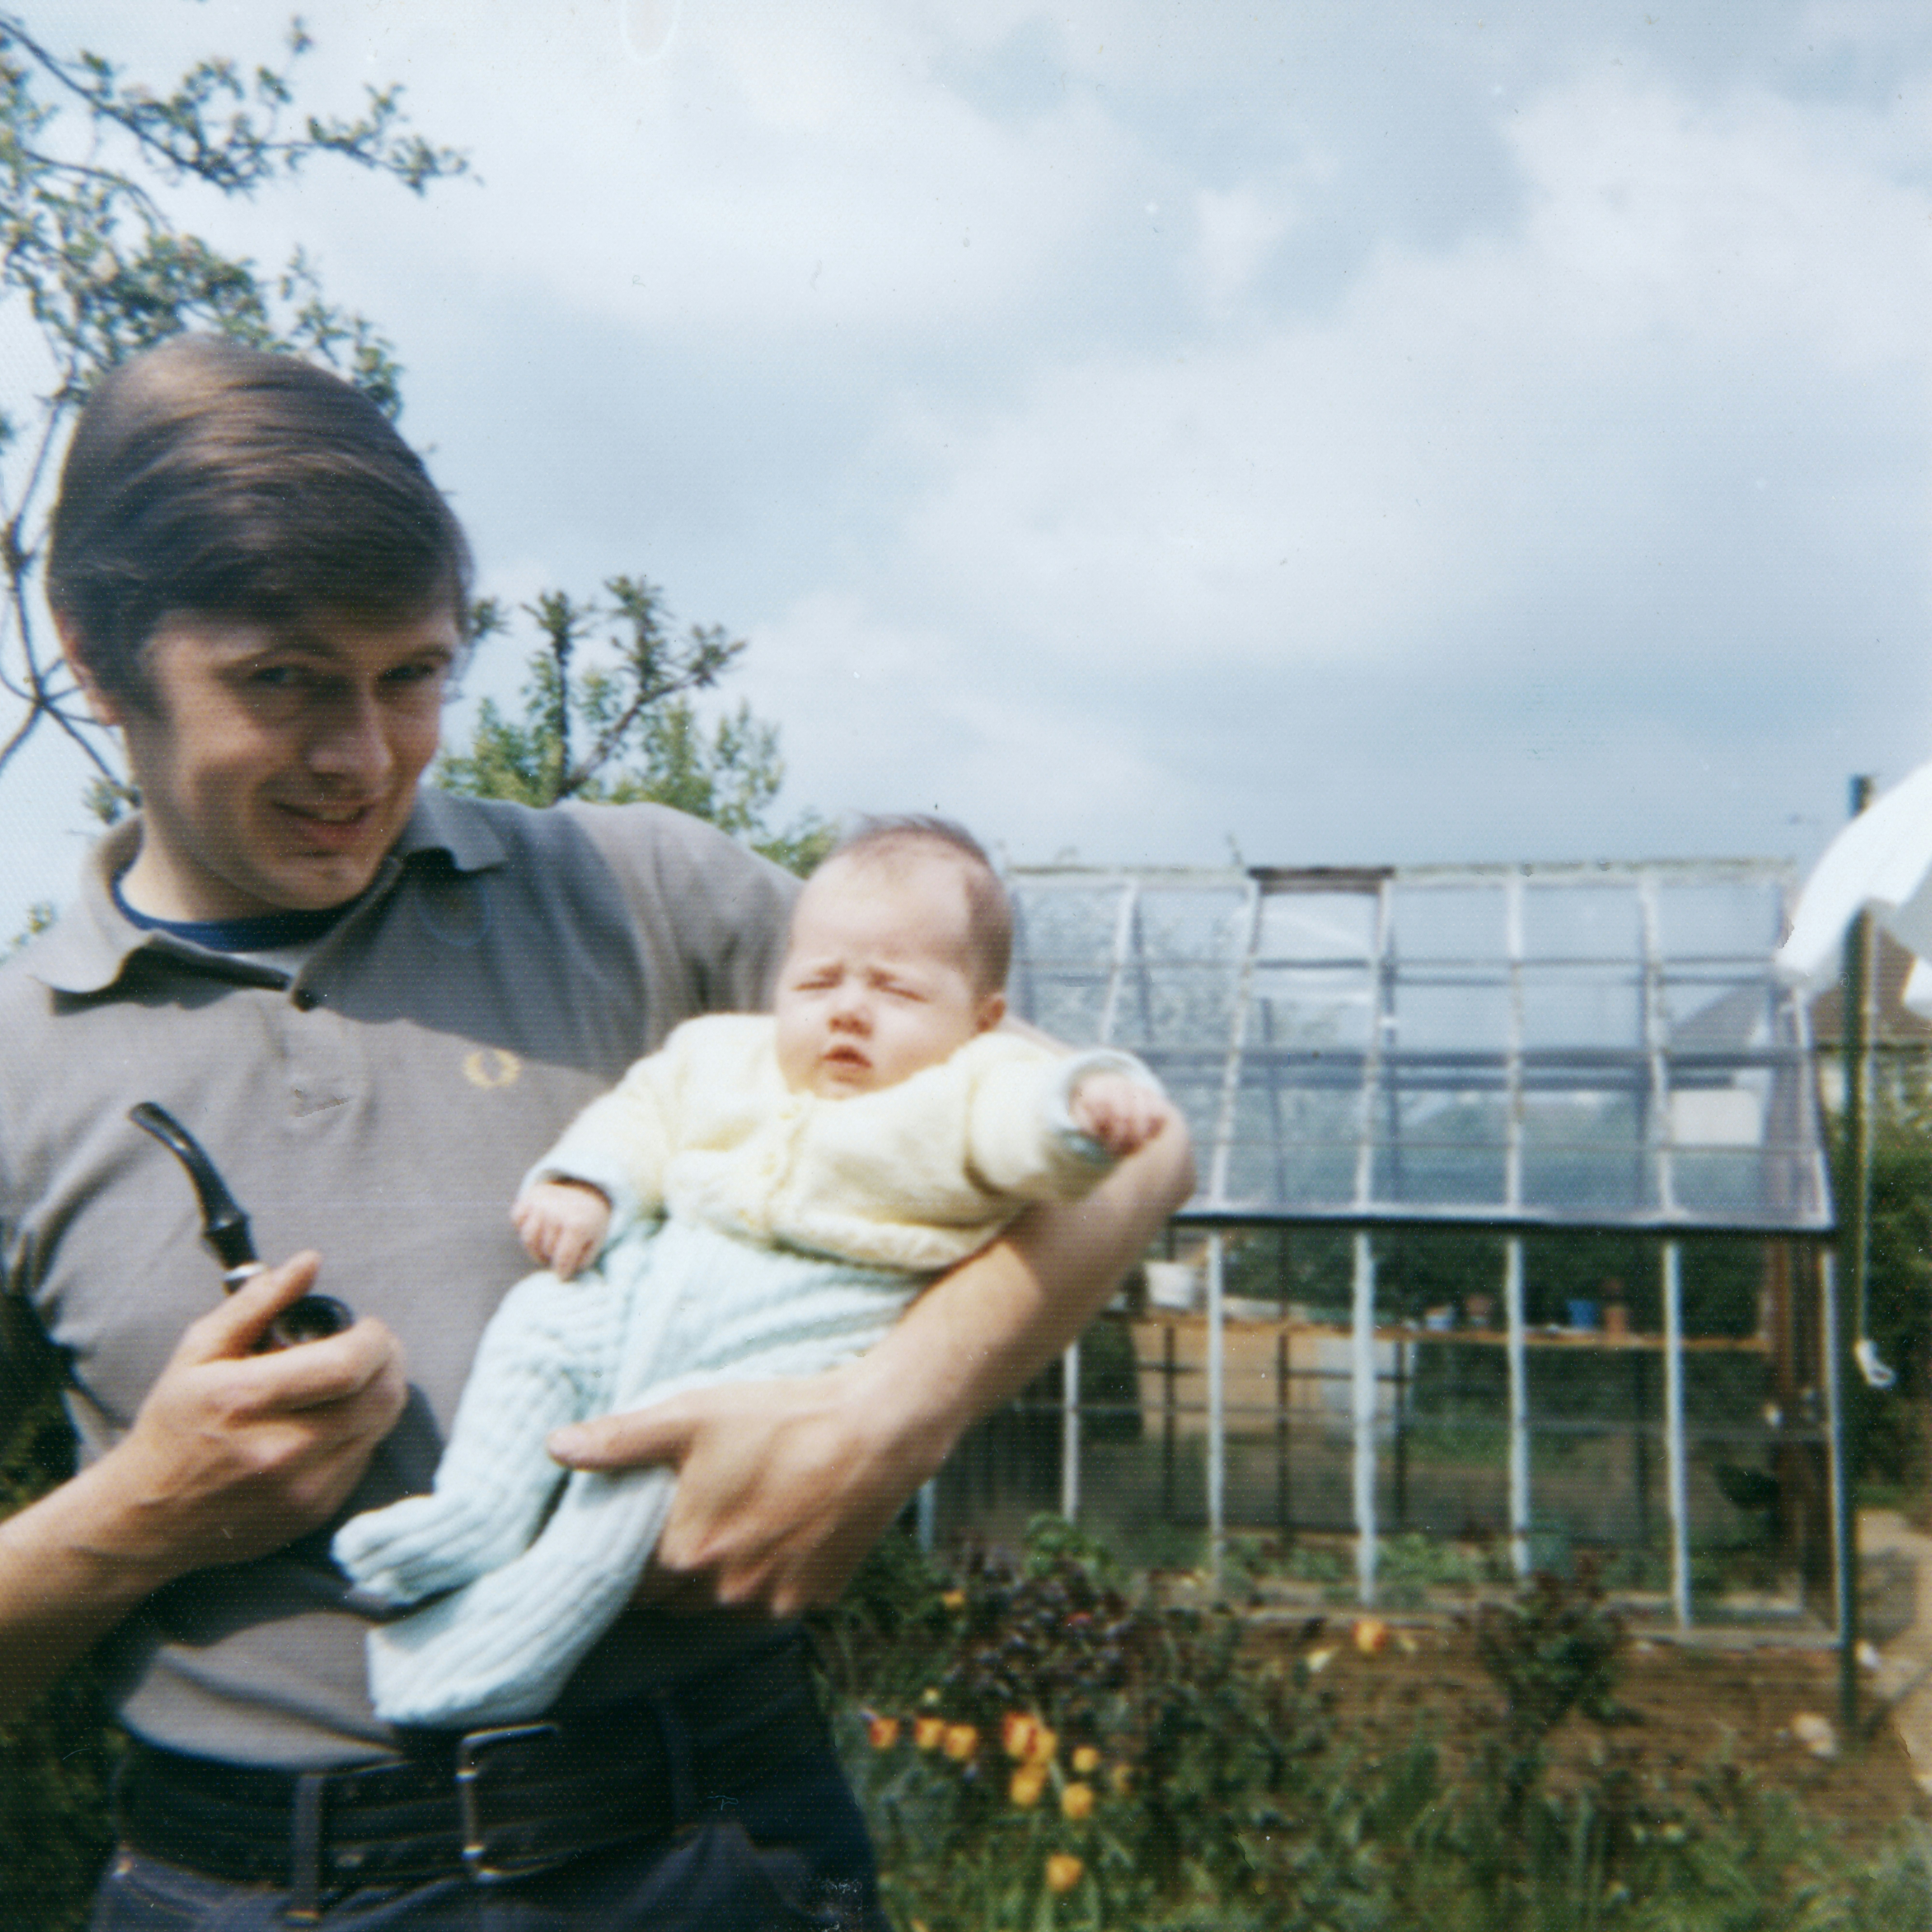 This is a photo of me and my dad, taken by my mum in 1975 on a Halina 35mm camera that she bought in 1968